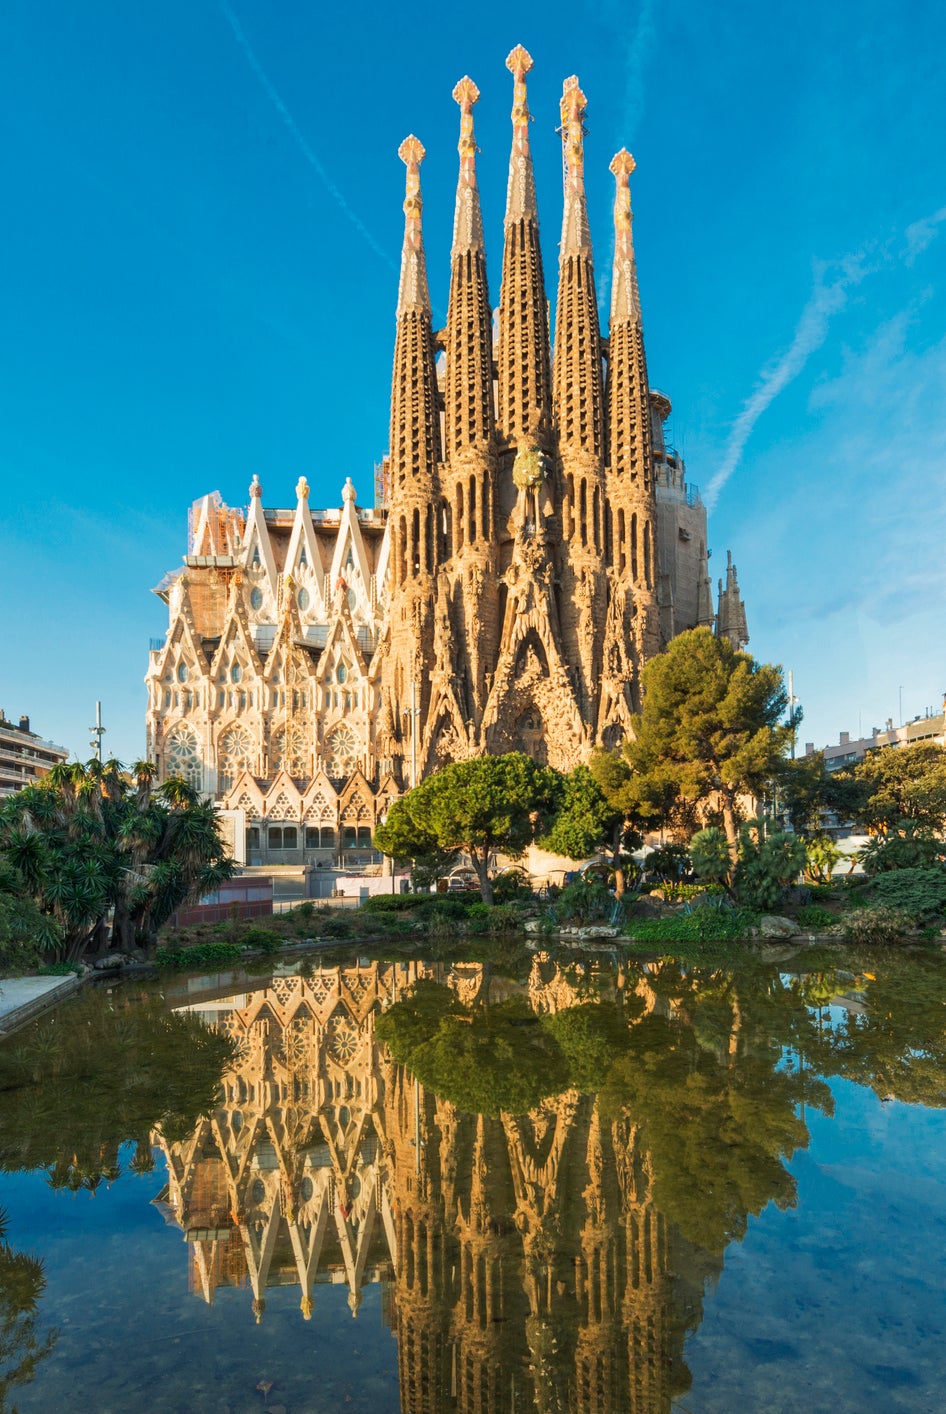 Sagrada Familia cathedral reflecting in water, with surrounding foliage and clear skies